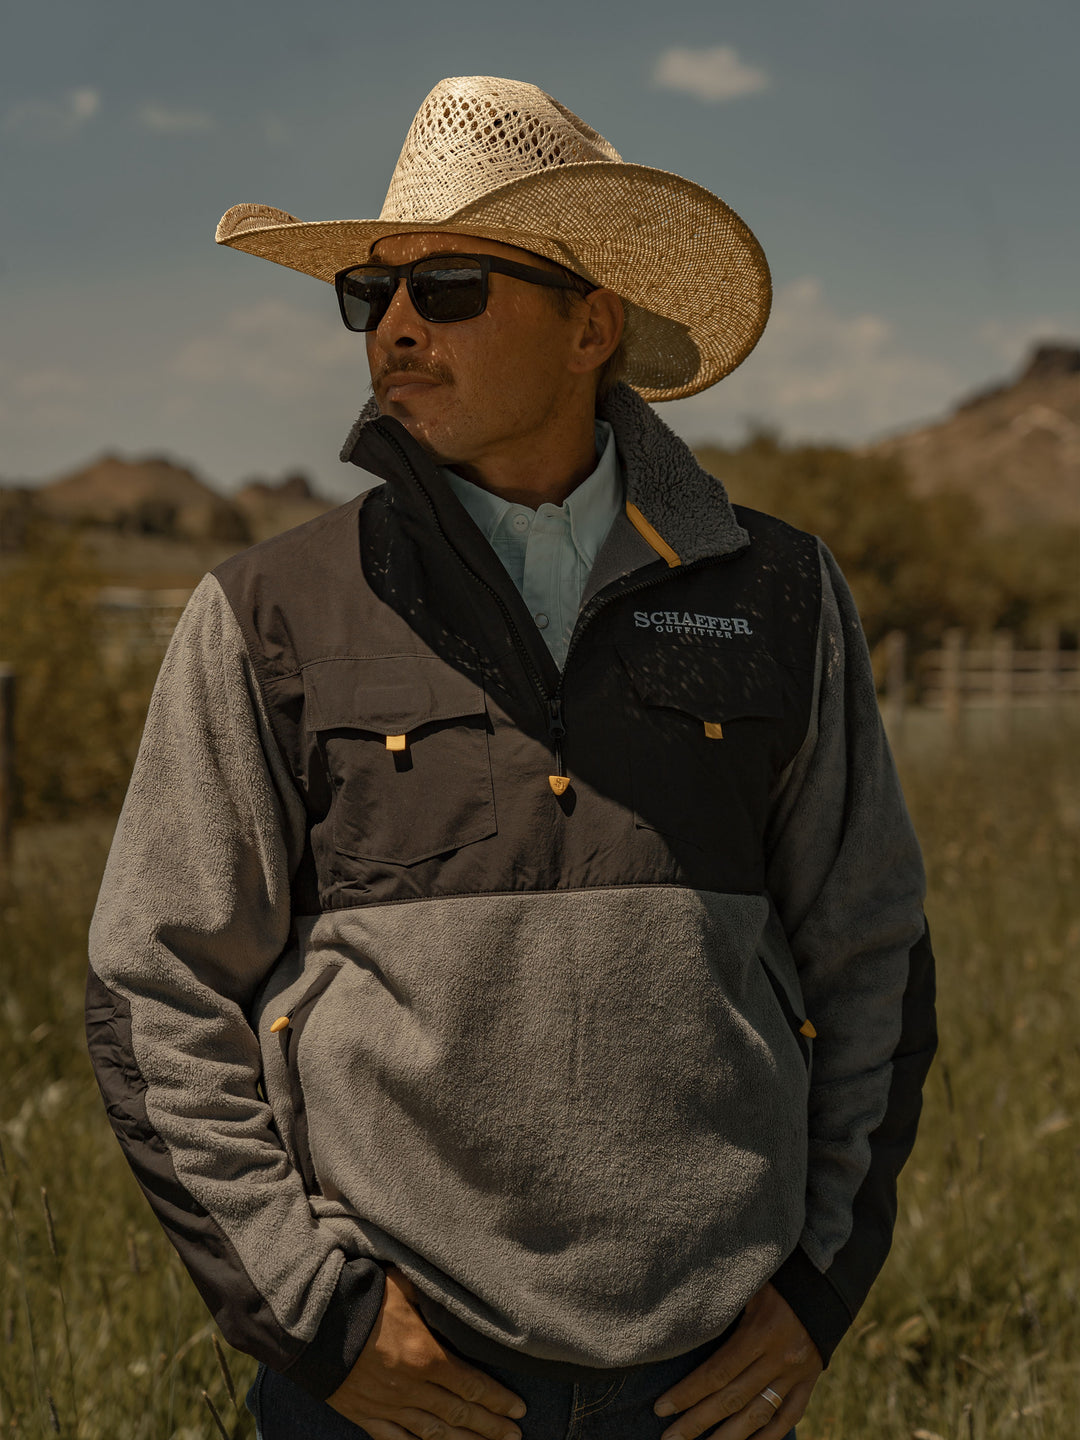 Carbondale Pullover - Schaefer Outfitter